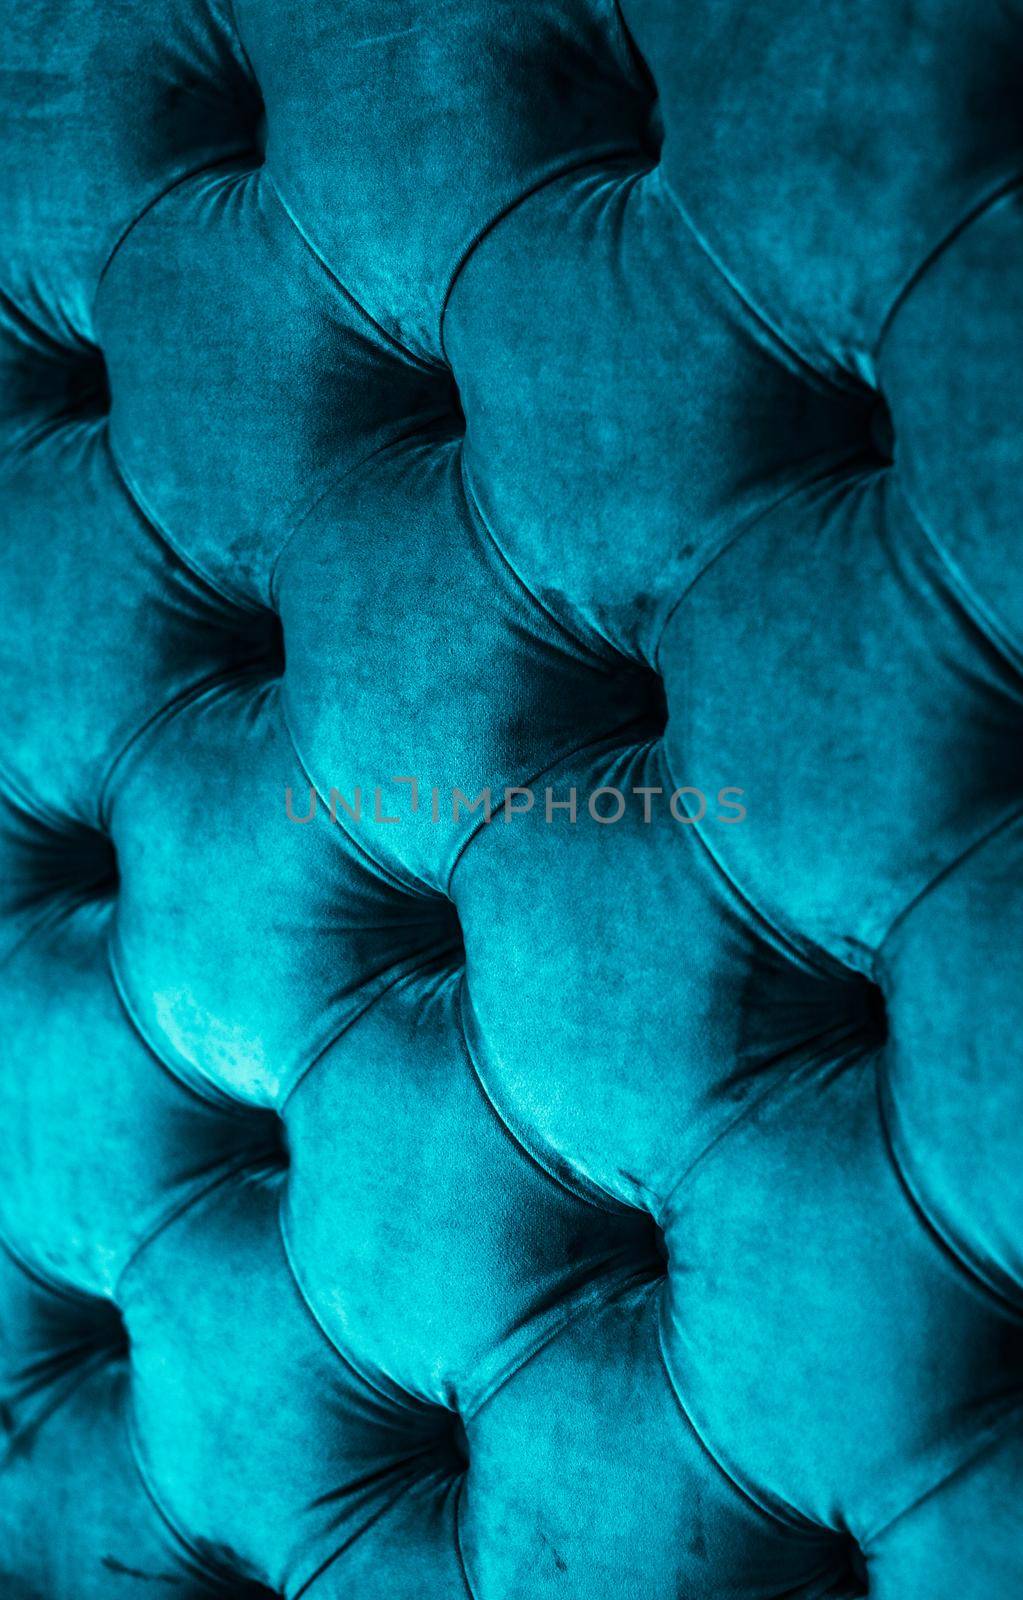 Furniture design, classic interior and royal vintage material concept - Blue luxury velour quilted sofa upholstery with buttons, elegant home decor texture and background